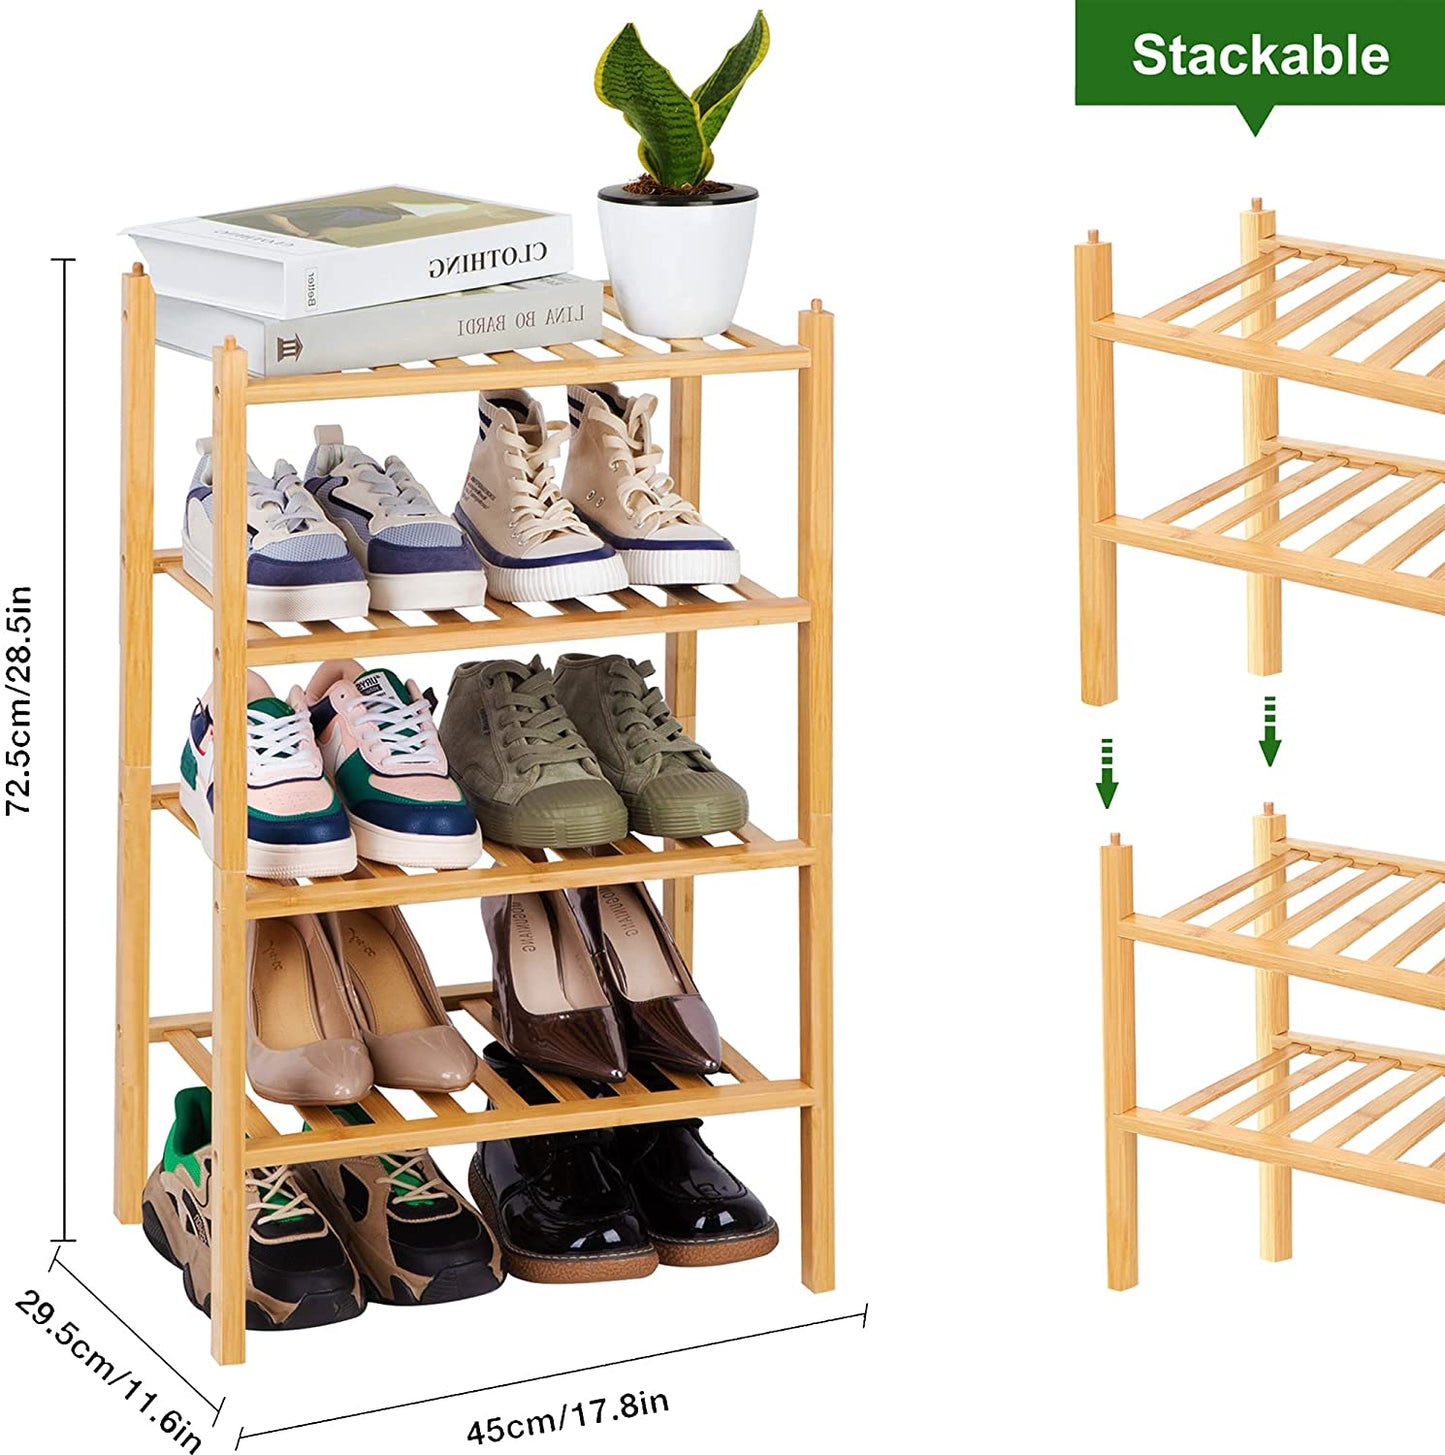 Narrow Shoe Rack for Closet,Sturdy Small Shoe Rack Organizer,4 Tier Stackable Shoe Storage for Small Space,Beautiful Natural Bamboo Shoe Rack Entryway